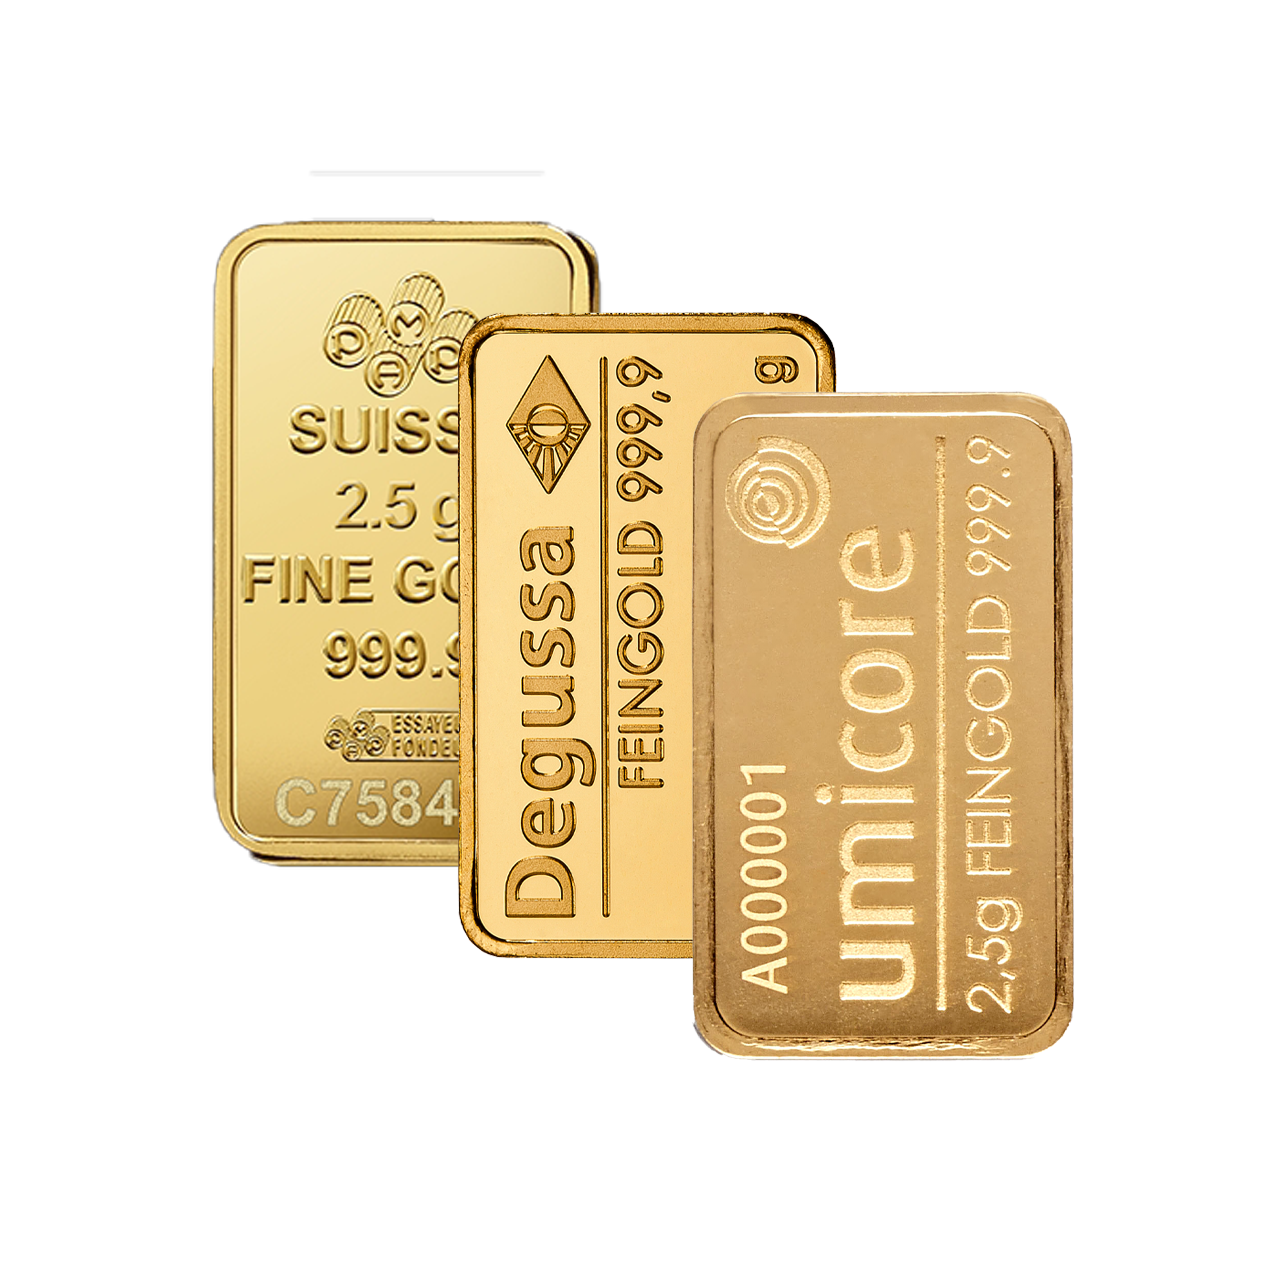 gold bar - 2,5 g fine gold .9999 - various Producers